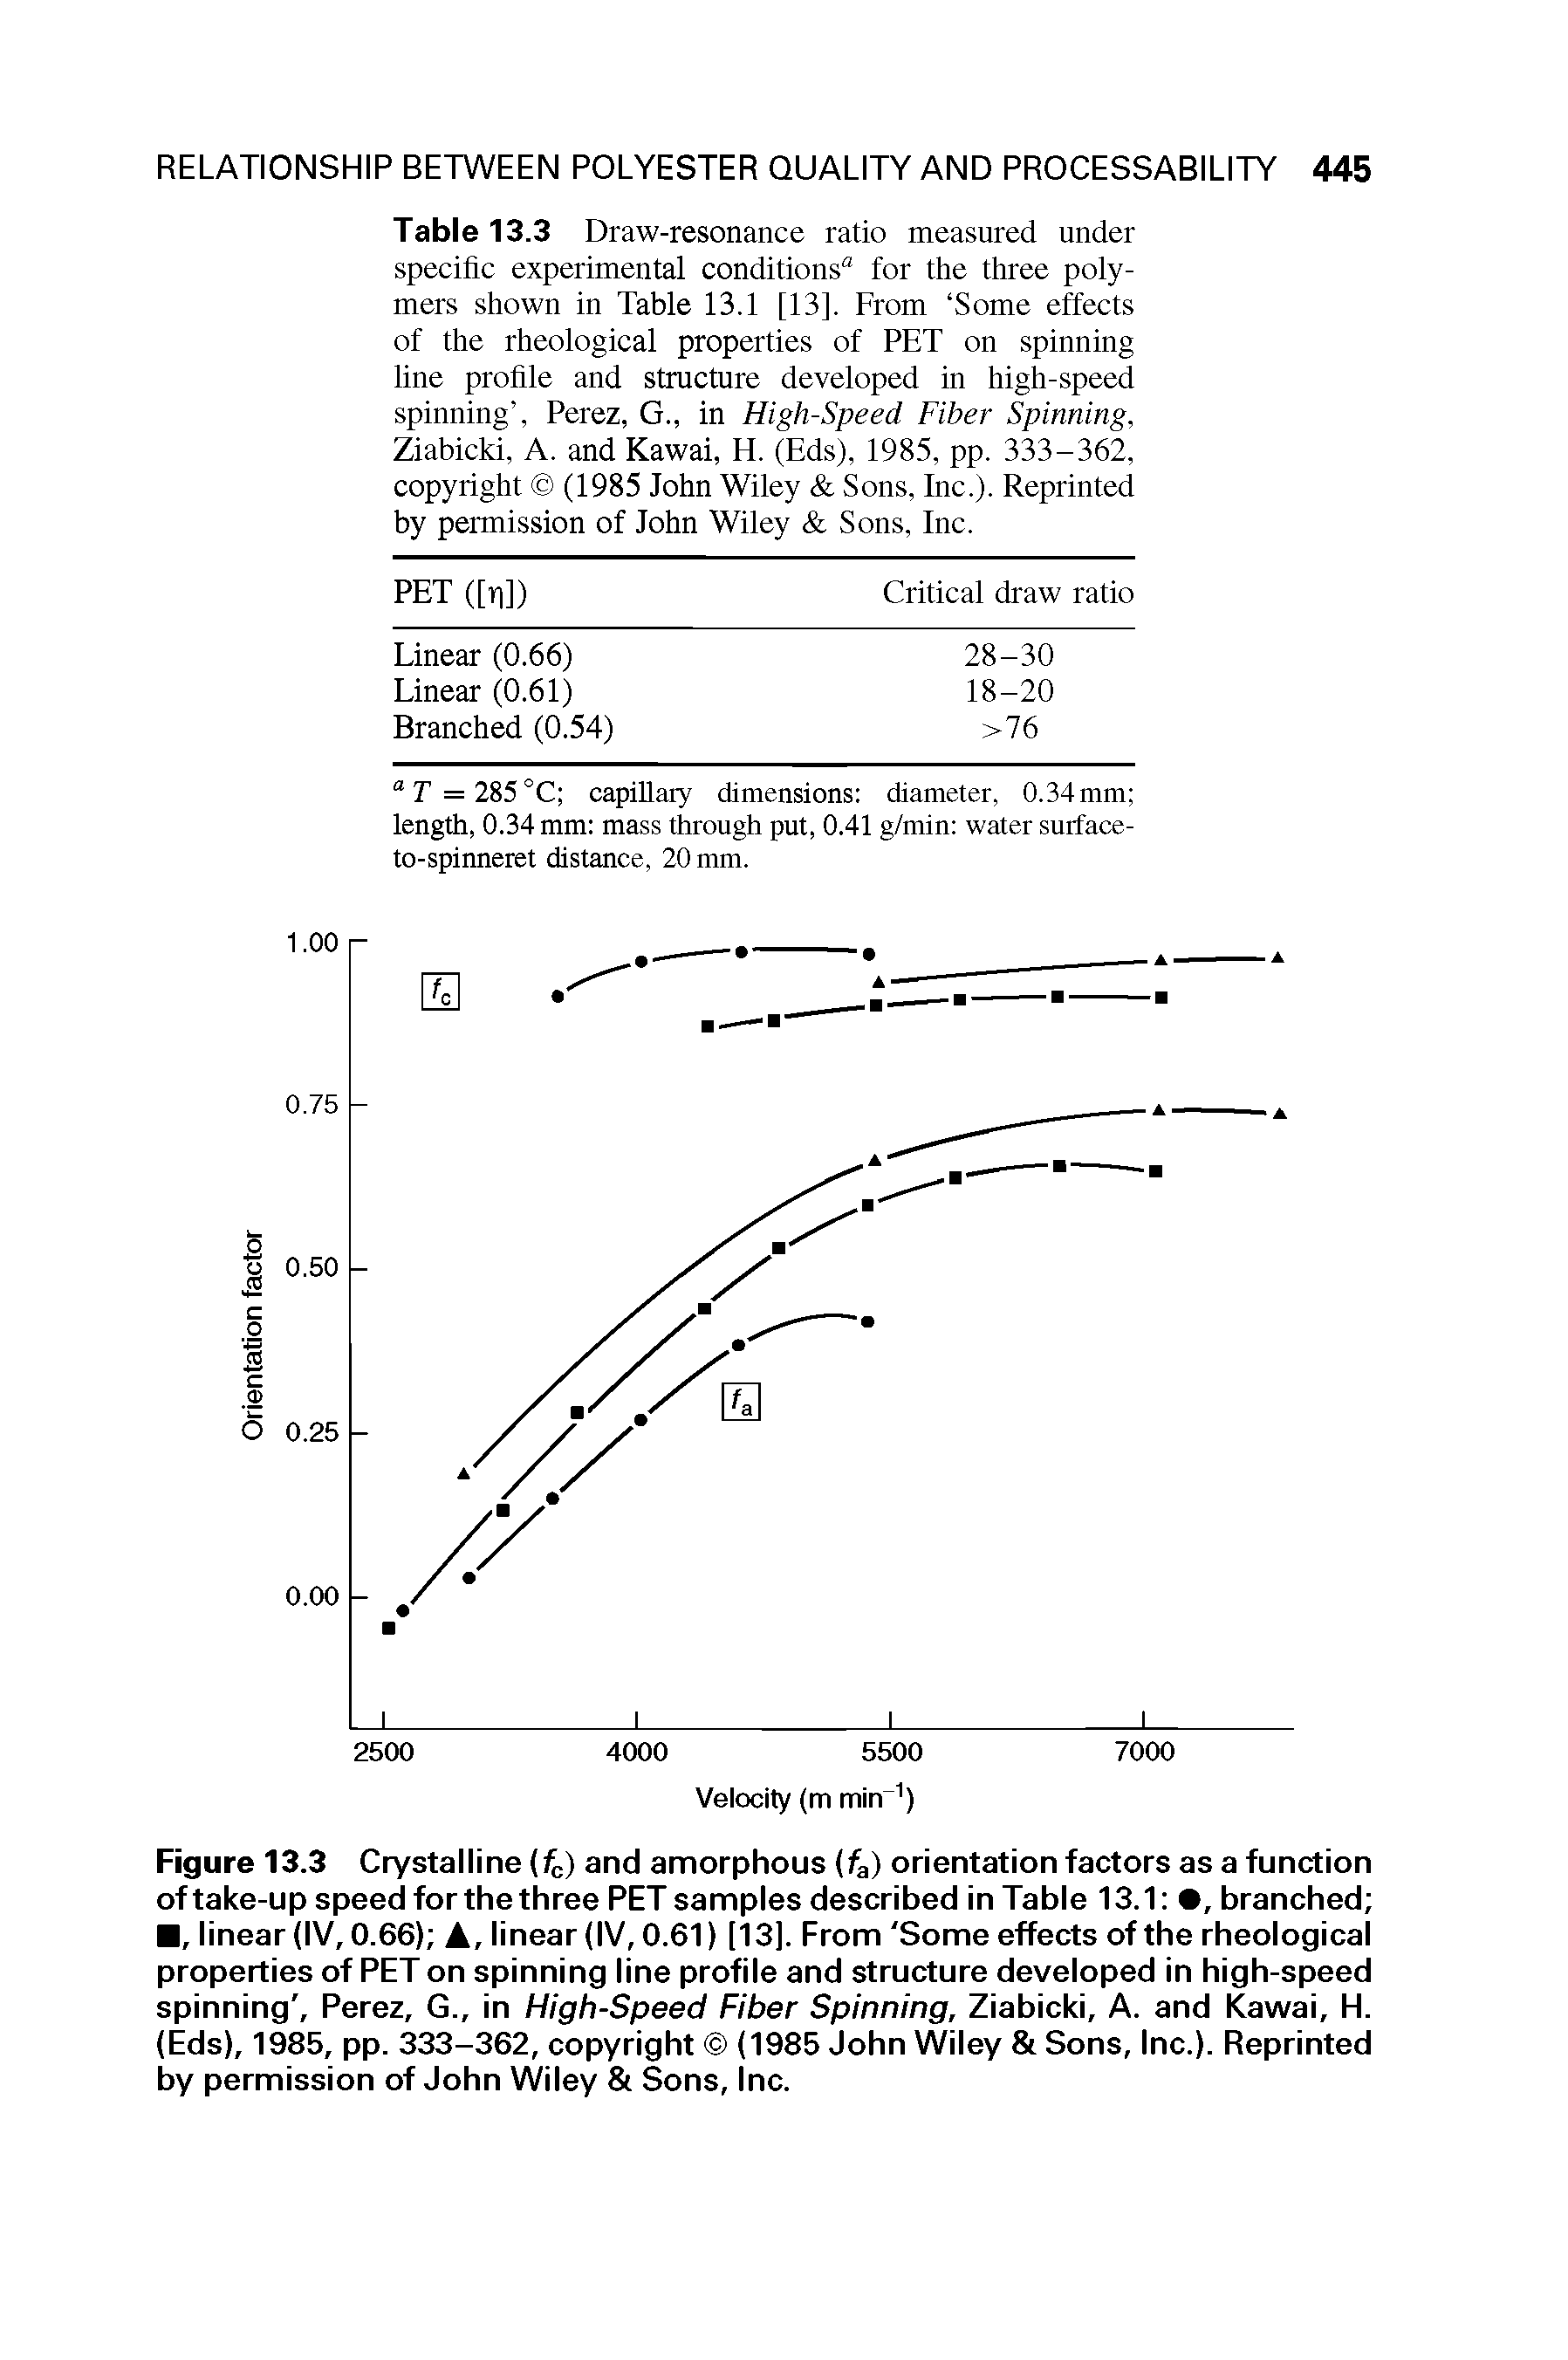 Table 13.3 Draw-resonance ratio measured under specific experimental conditions0 for the three polymers shown in Table 13.1 [13]. From Some effects of the rheological properties of PET on spinning line profile and structure developed in high-speed spinning , Perez, G., in High-Speed Fiber Spinning, Ziabicki, A. and Kawai, H. (Eds), 1985, pp. 333-362, copyright (1985 John Wiley Sons, Inc.). Reprinted by permission of John Wiley Sons, Inc.